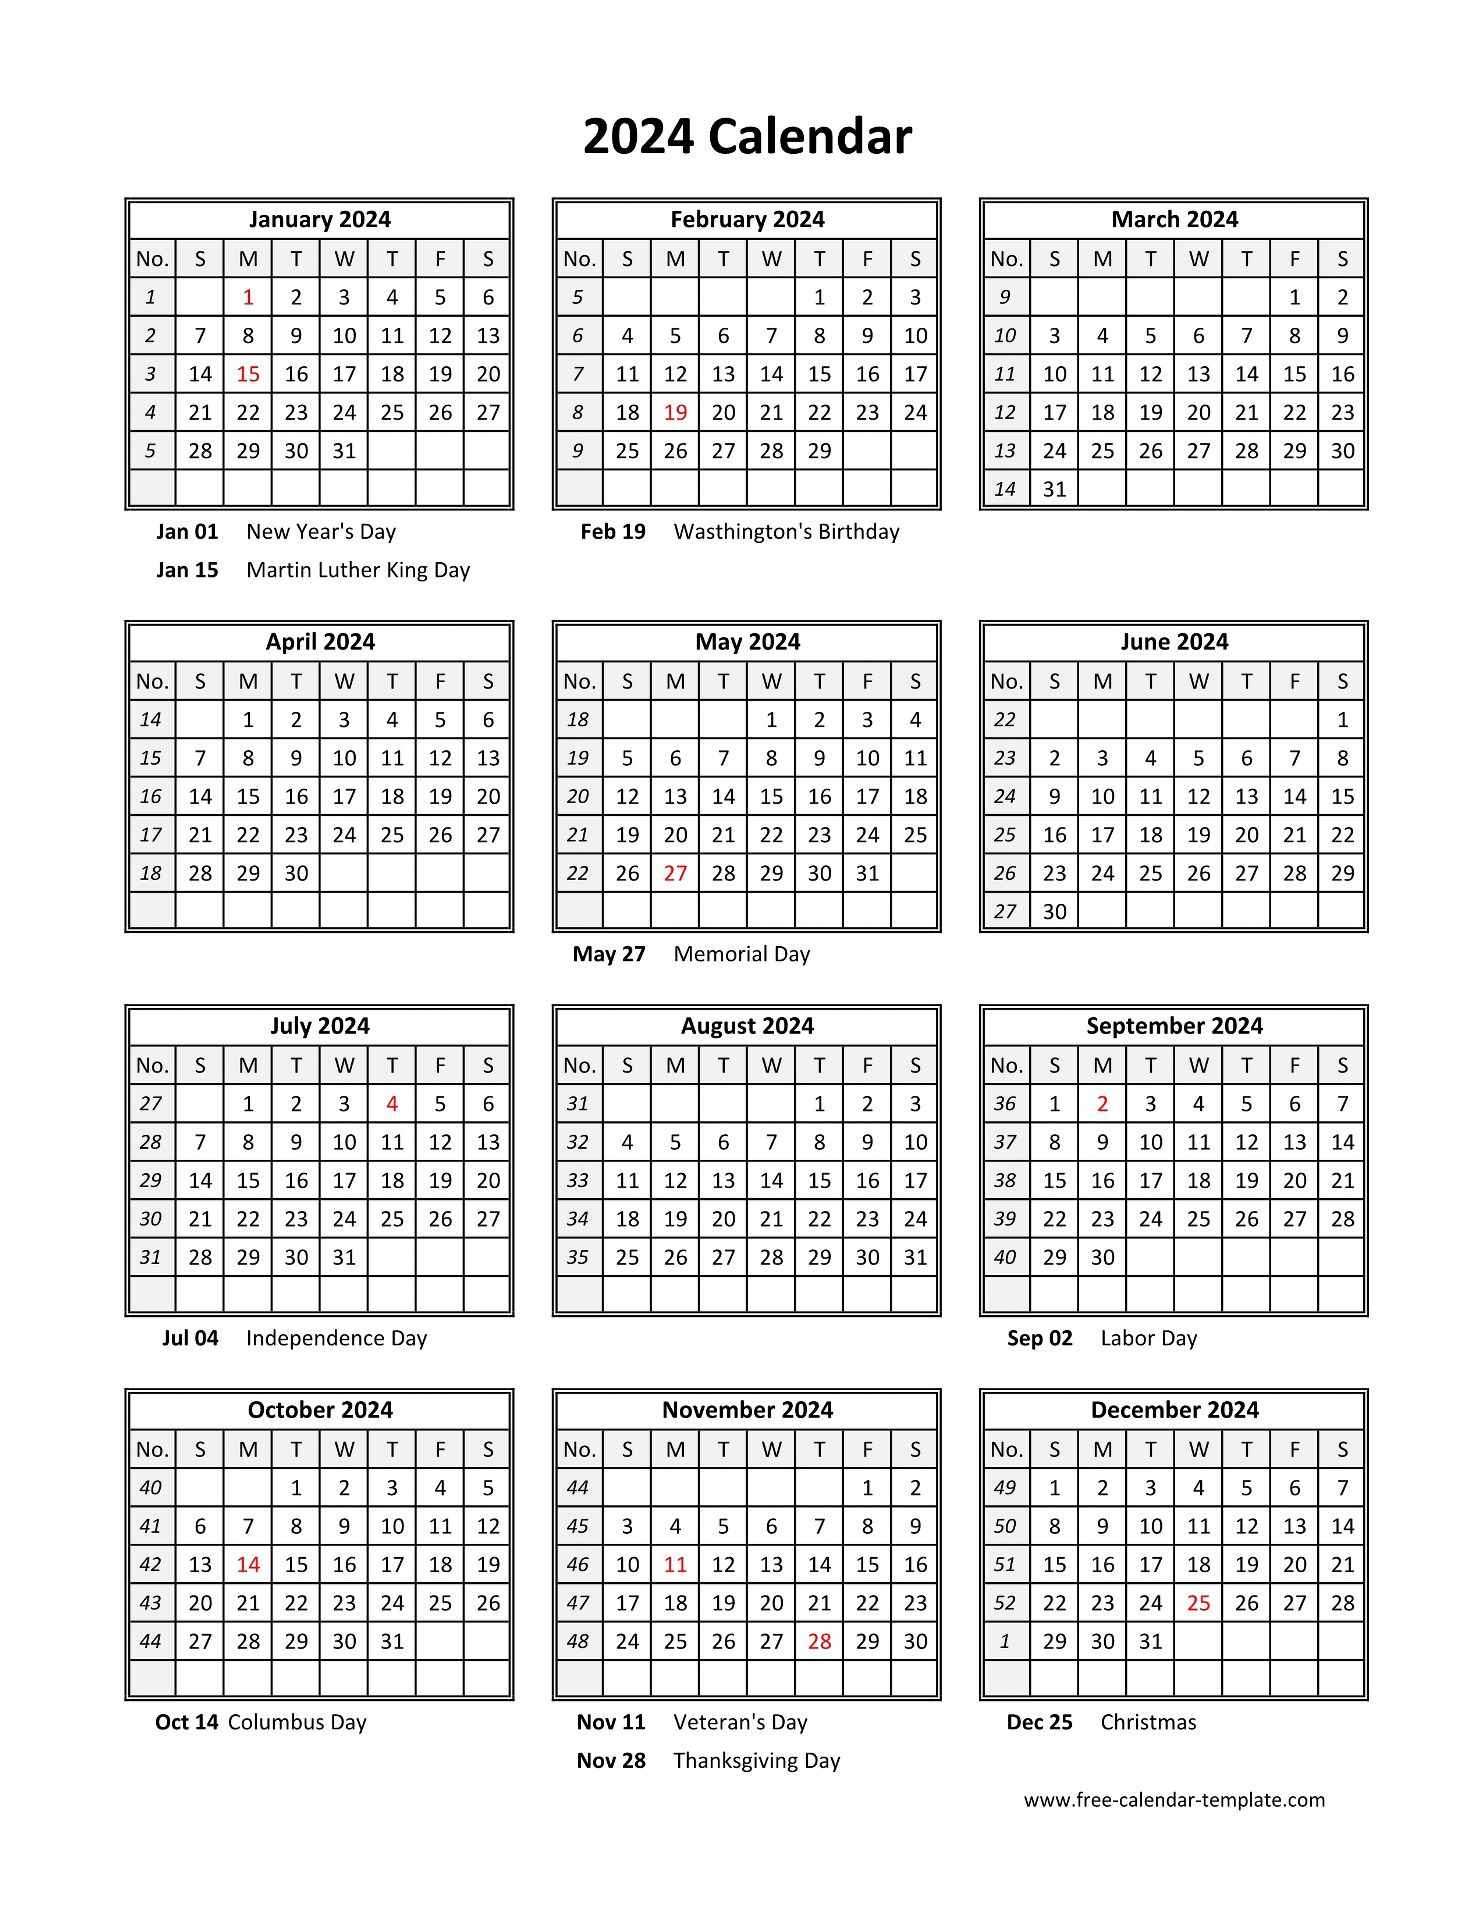 Yearly Printable Calendar 2024 With Holidays | Free-Calendar | 2024 Year At A Glance Calendar Printable Free